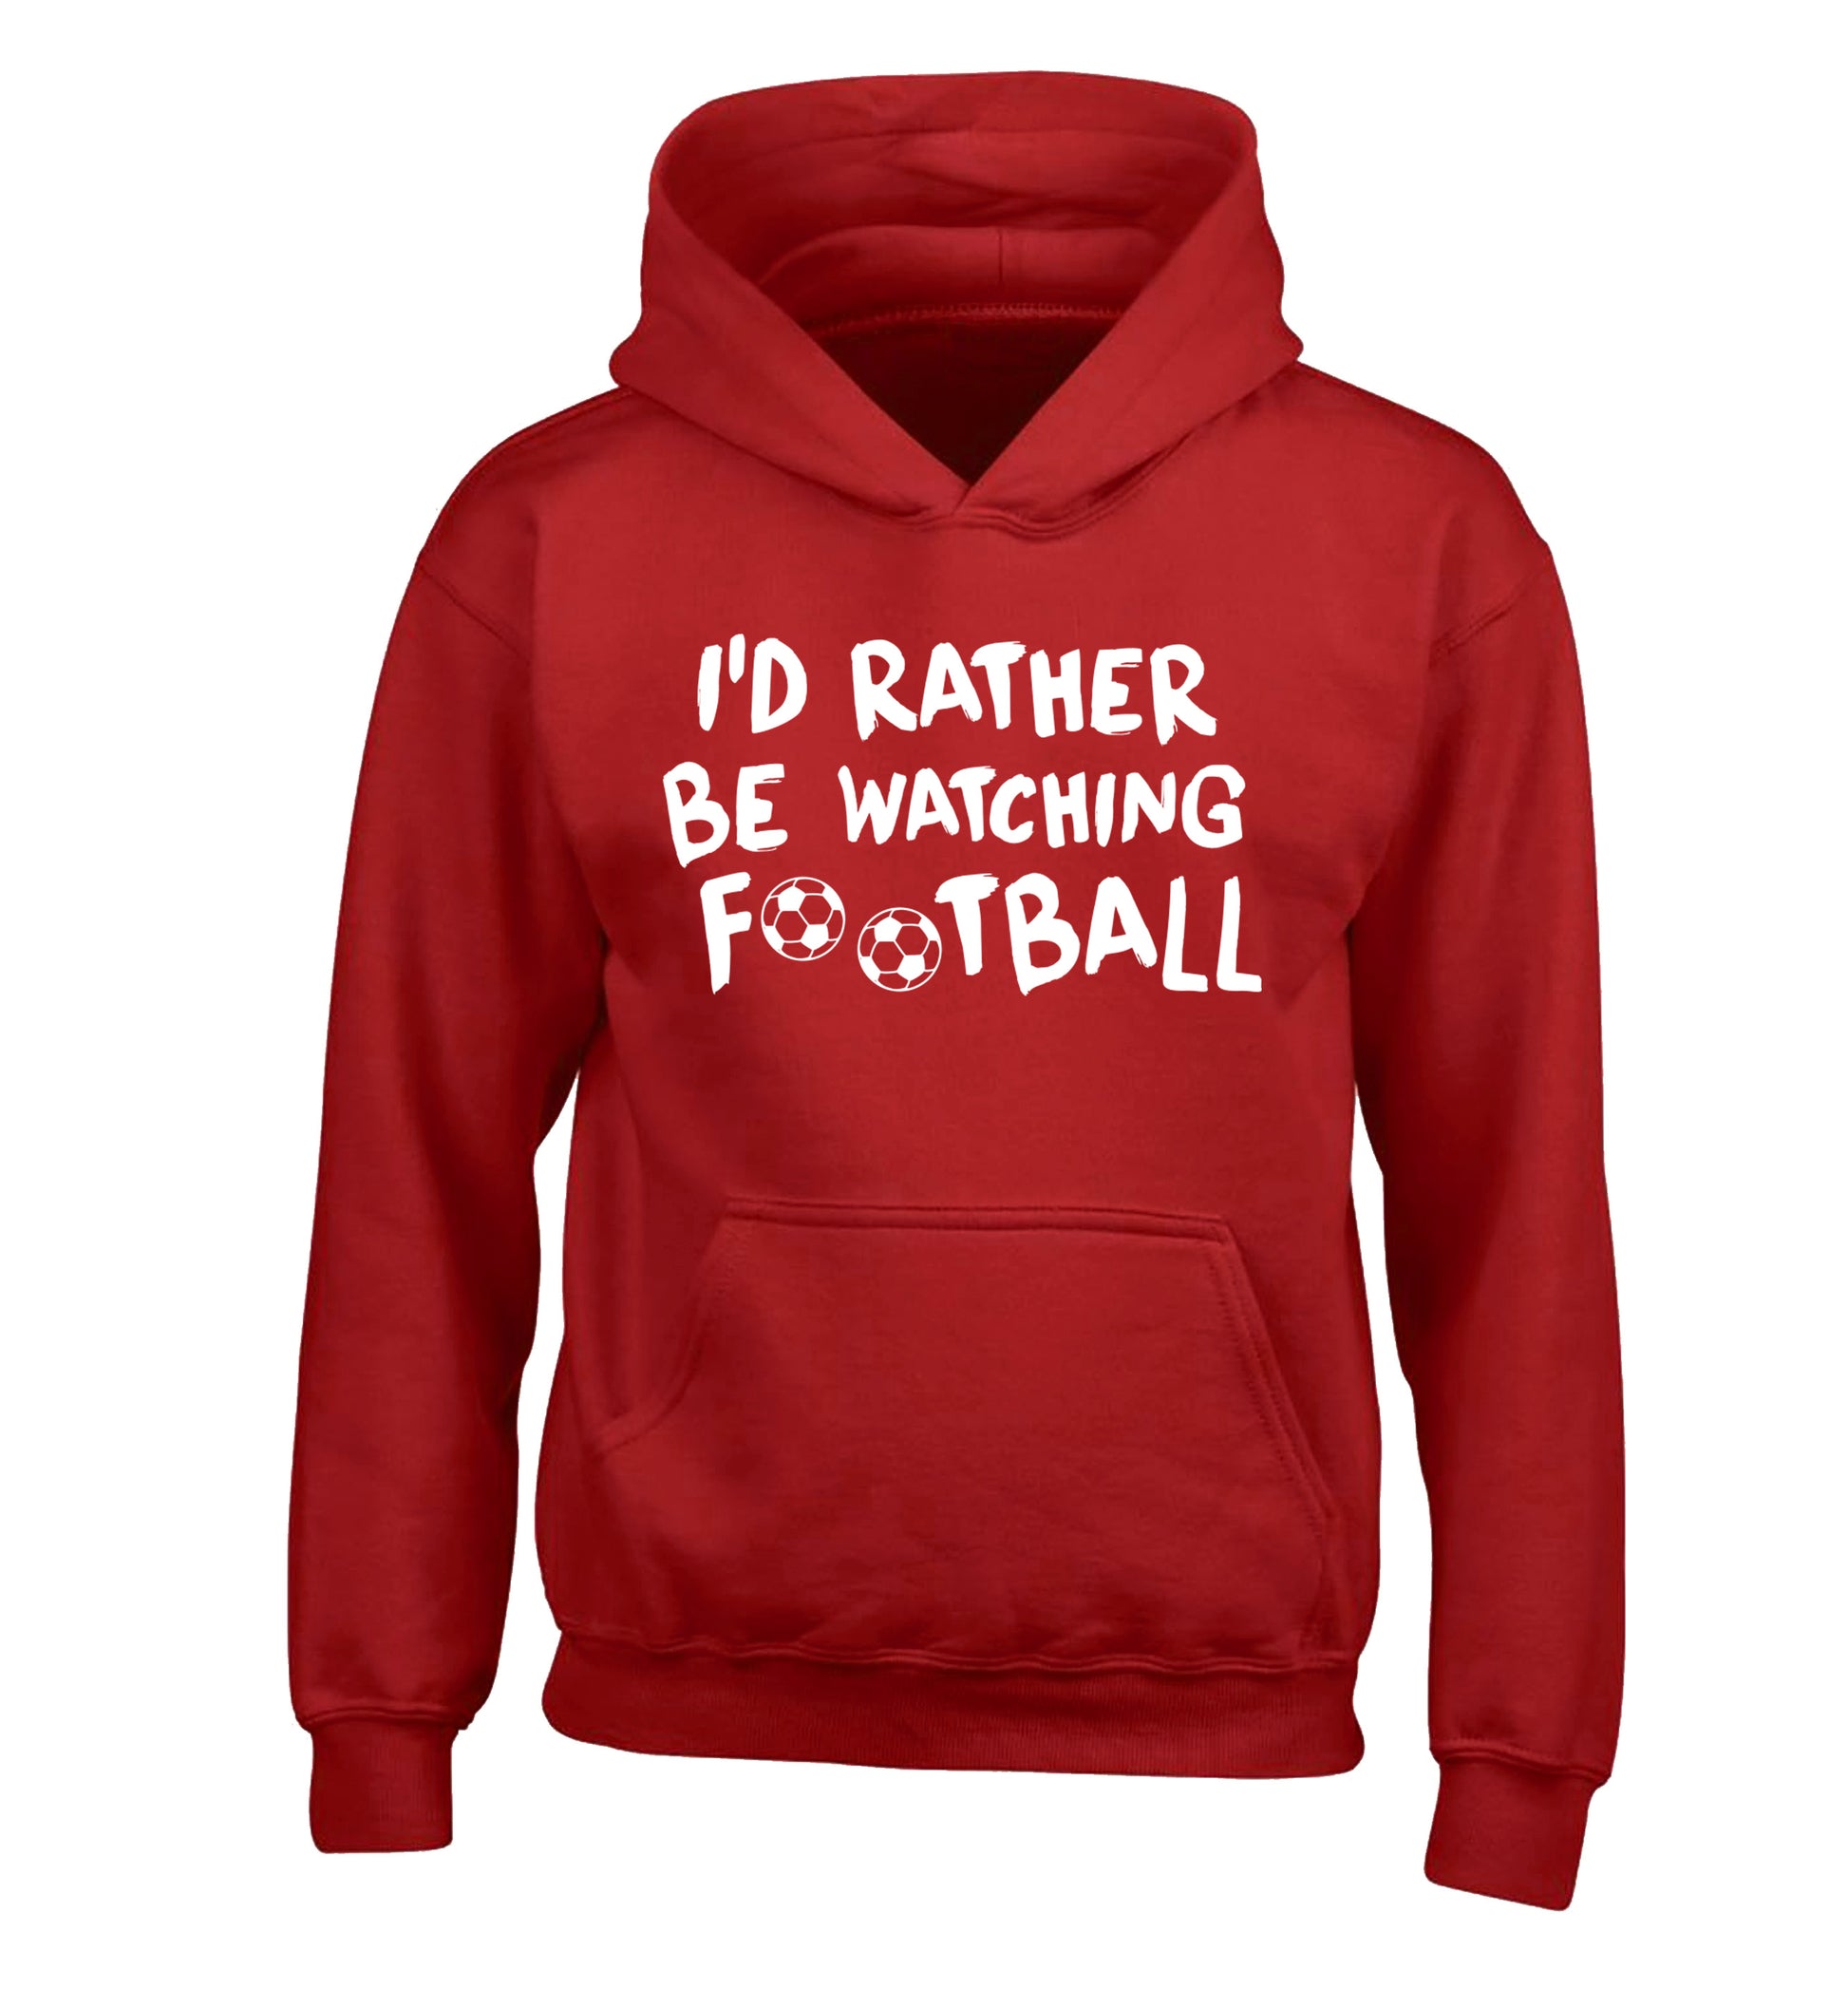 I'd rather be watching football children's red hoodie 12-14 Years